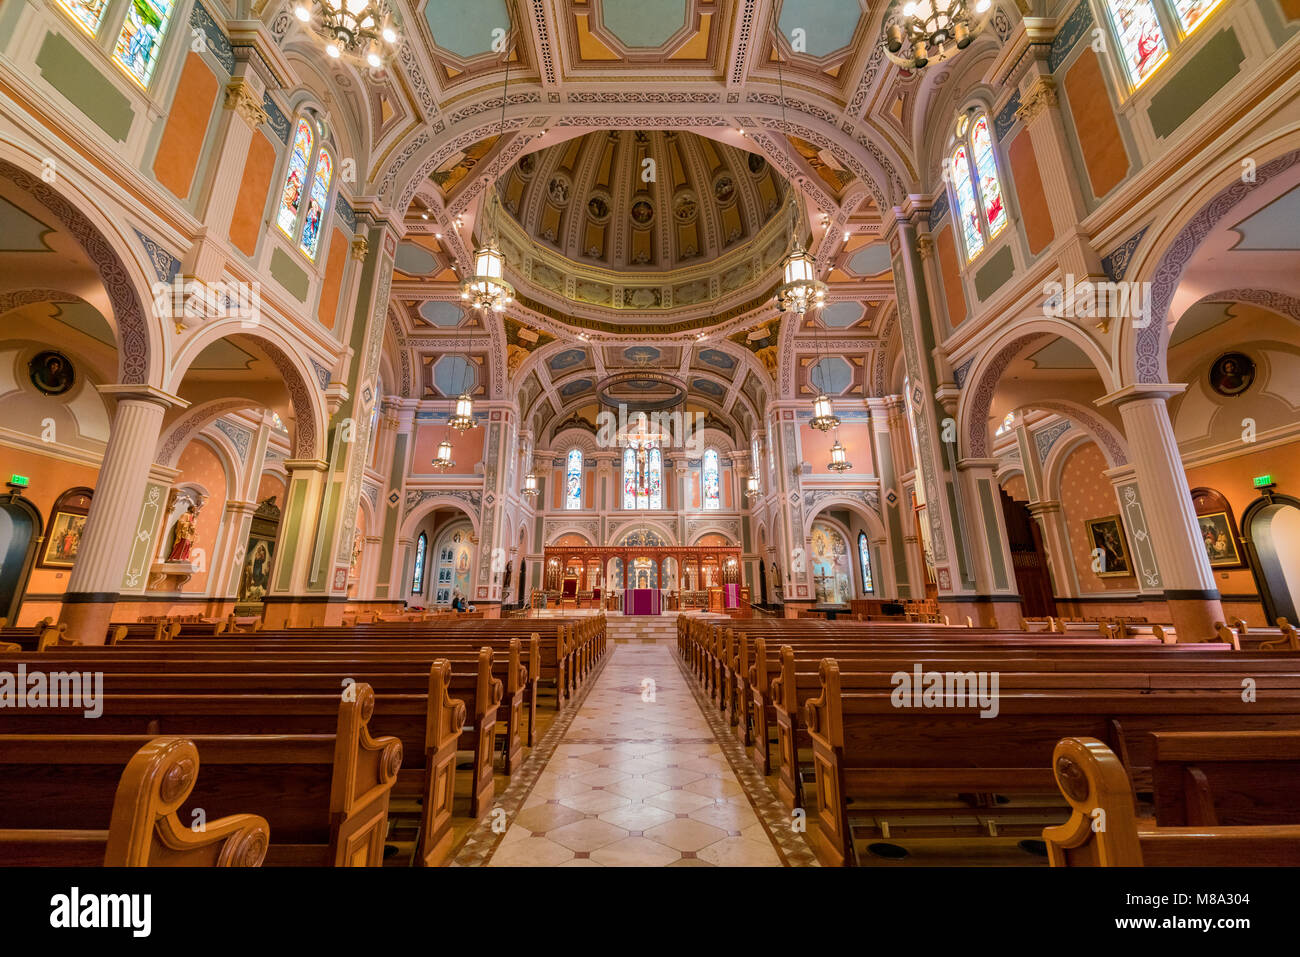 Sacramento Feb 20 Interior View Of The Beautiful Cathedral Of The M8A304 